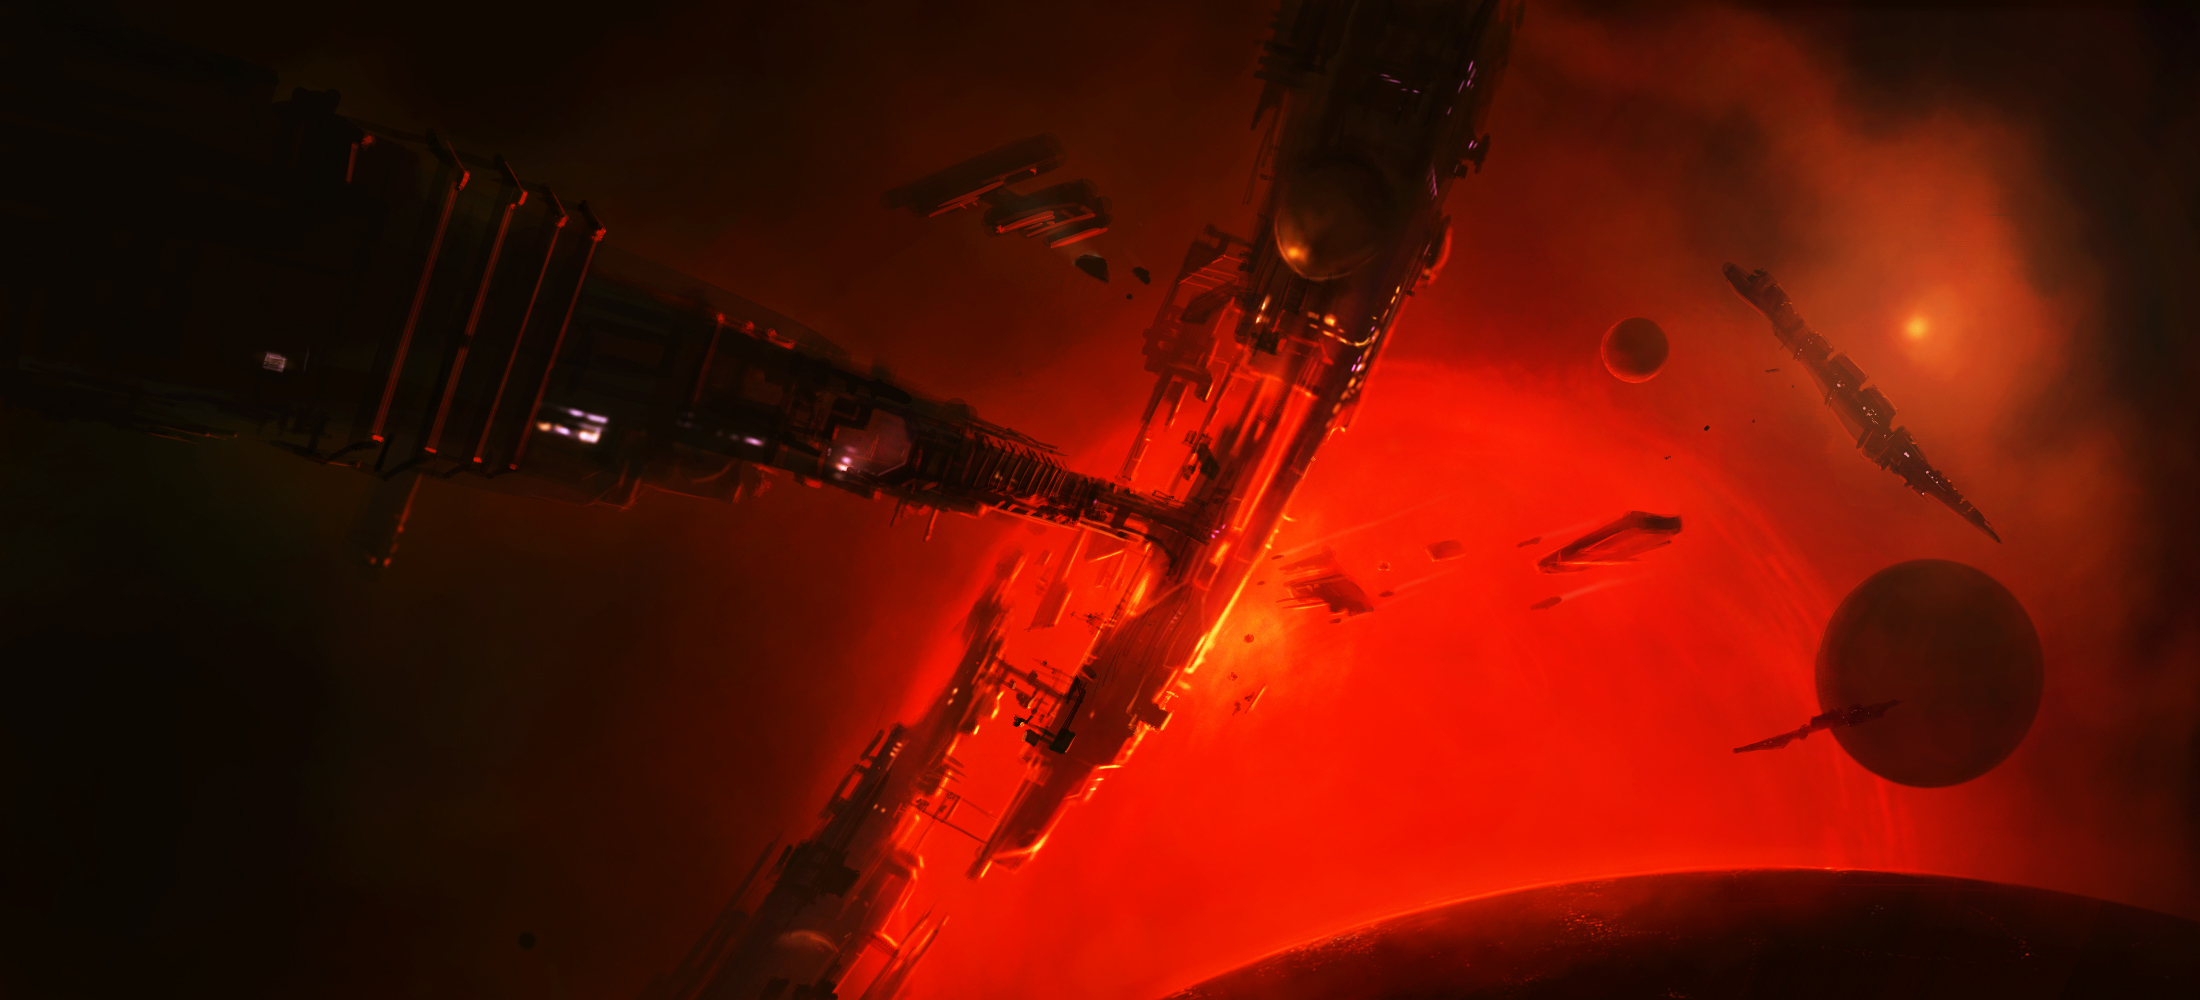 250+ Elite: Dangerous HD Wallpapers and Backgrounds